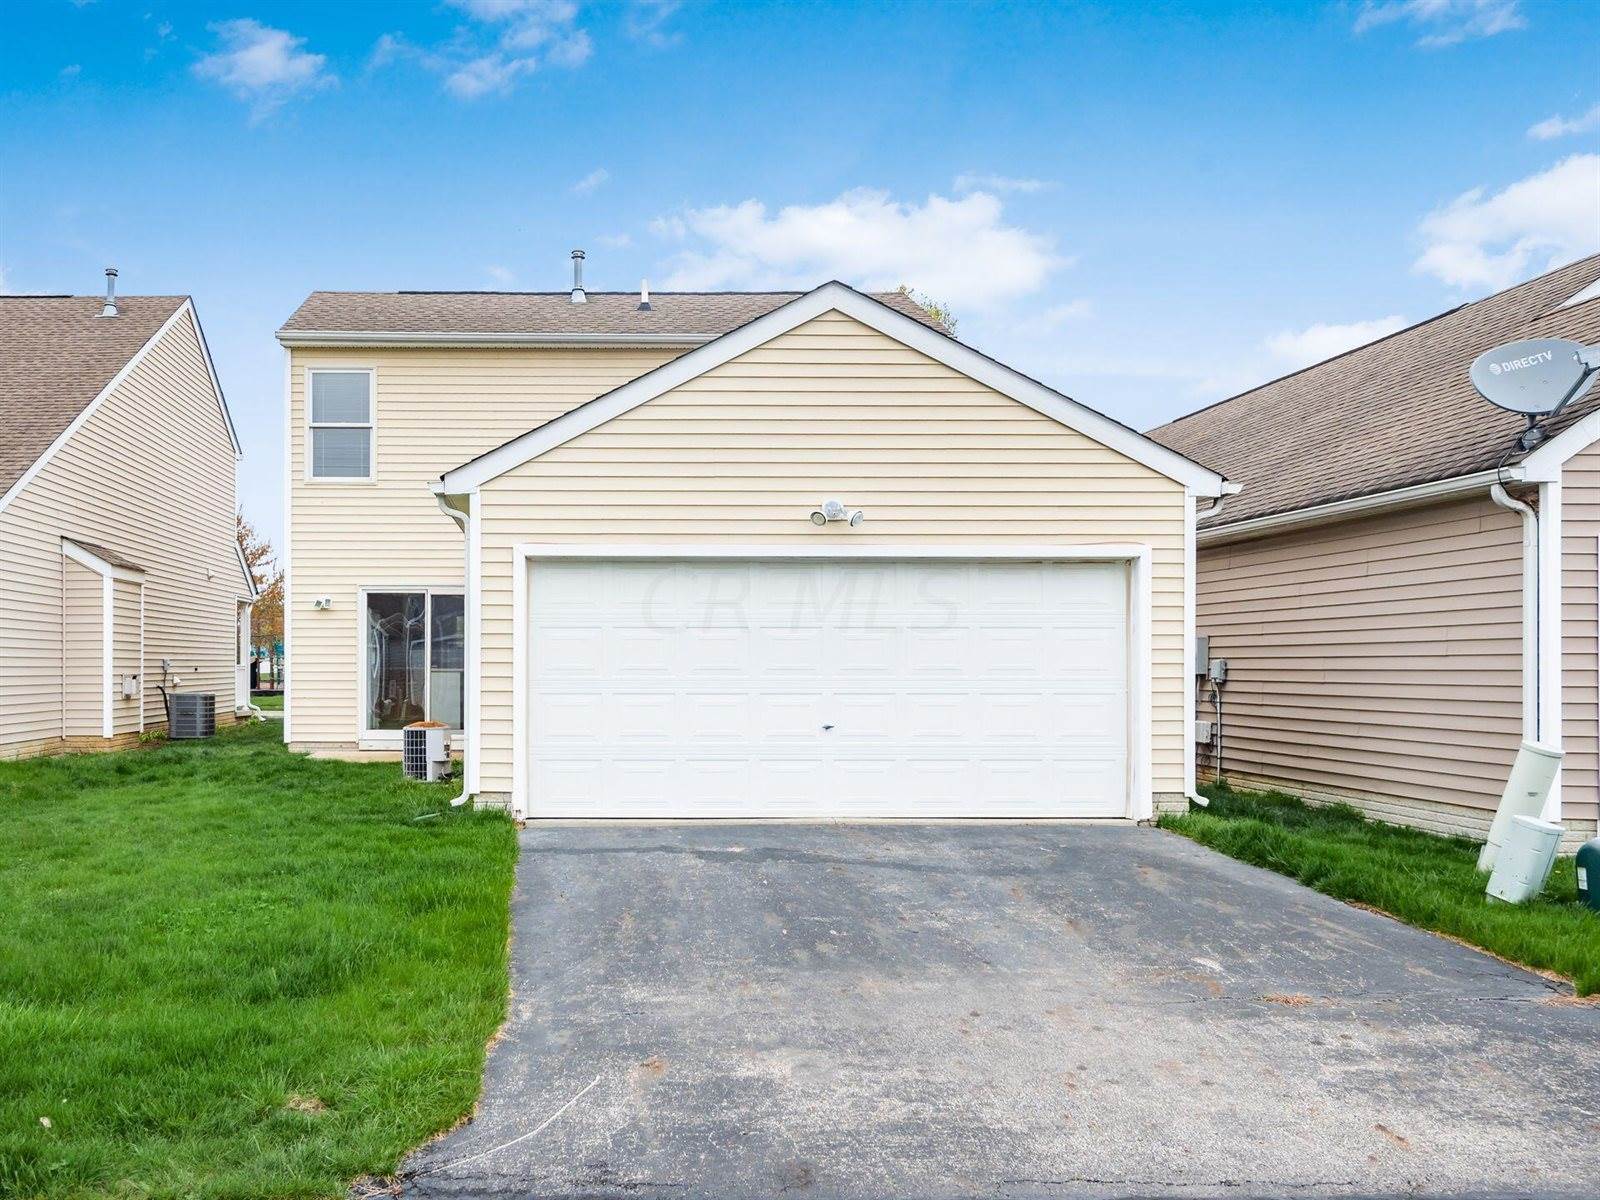 6209 Streaming Avenue, #186, Galloway, OH 43119